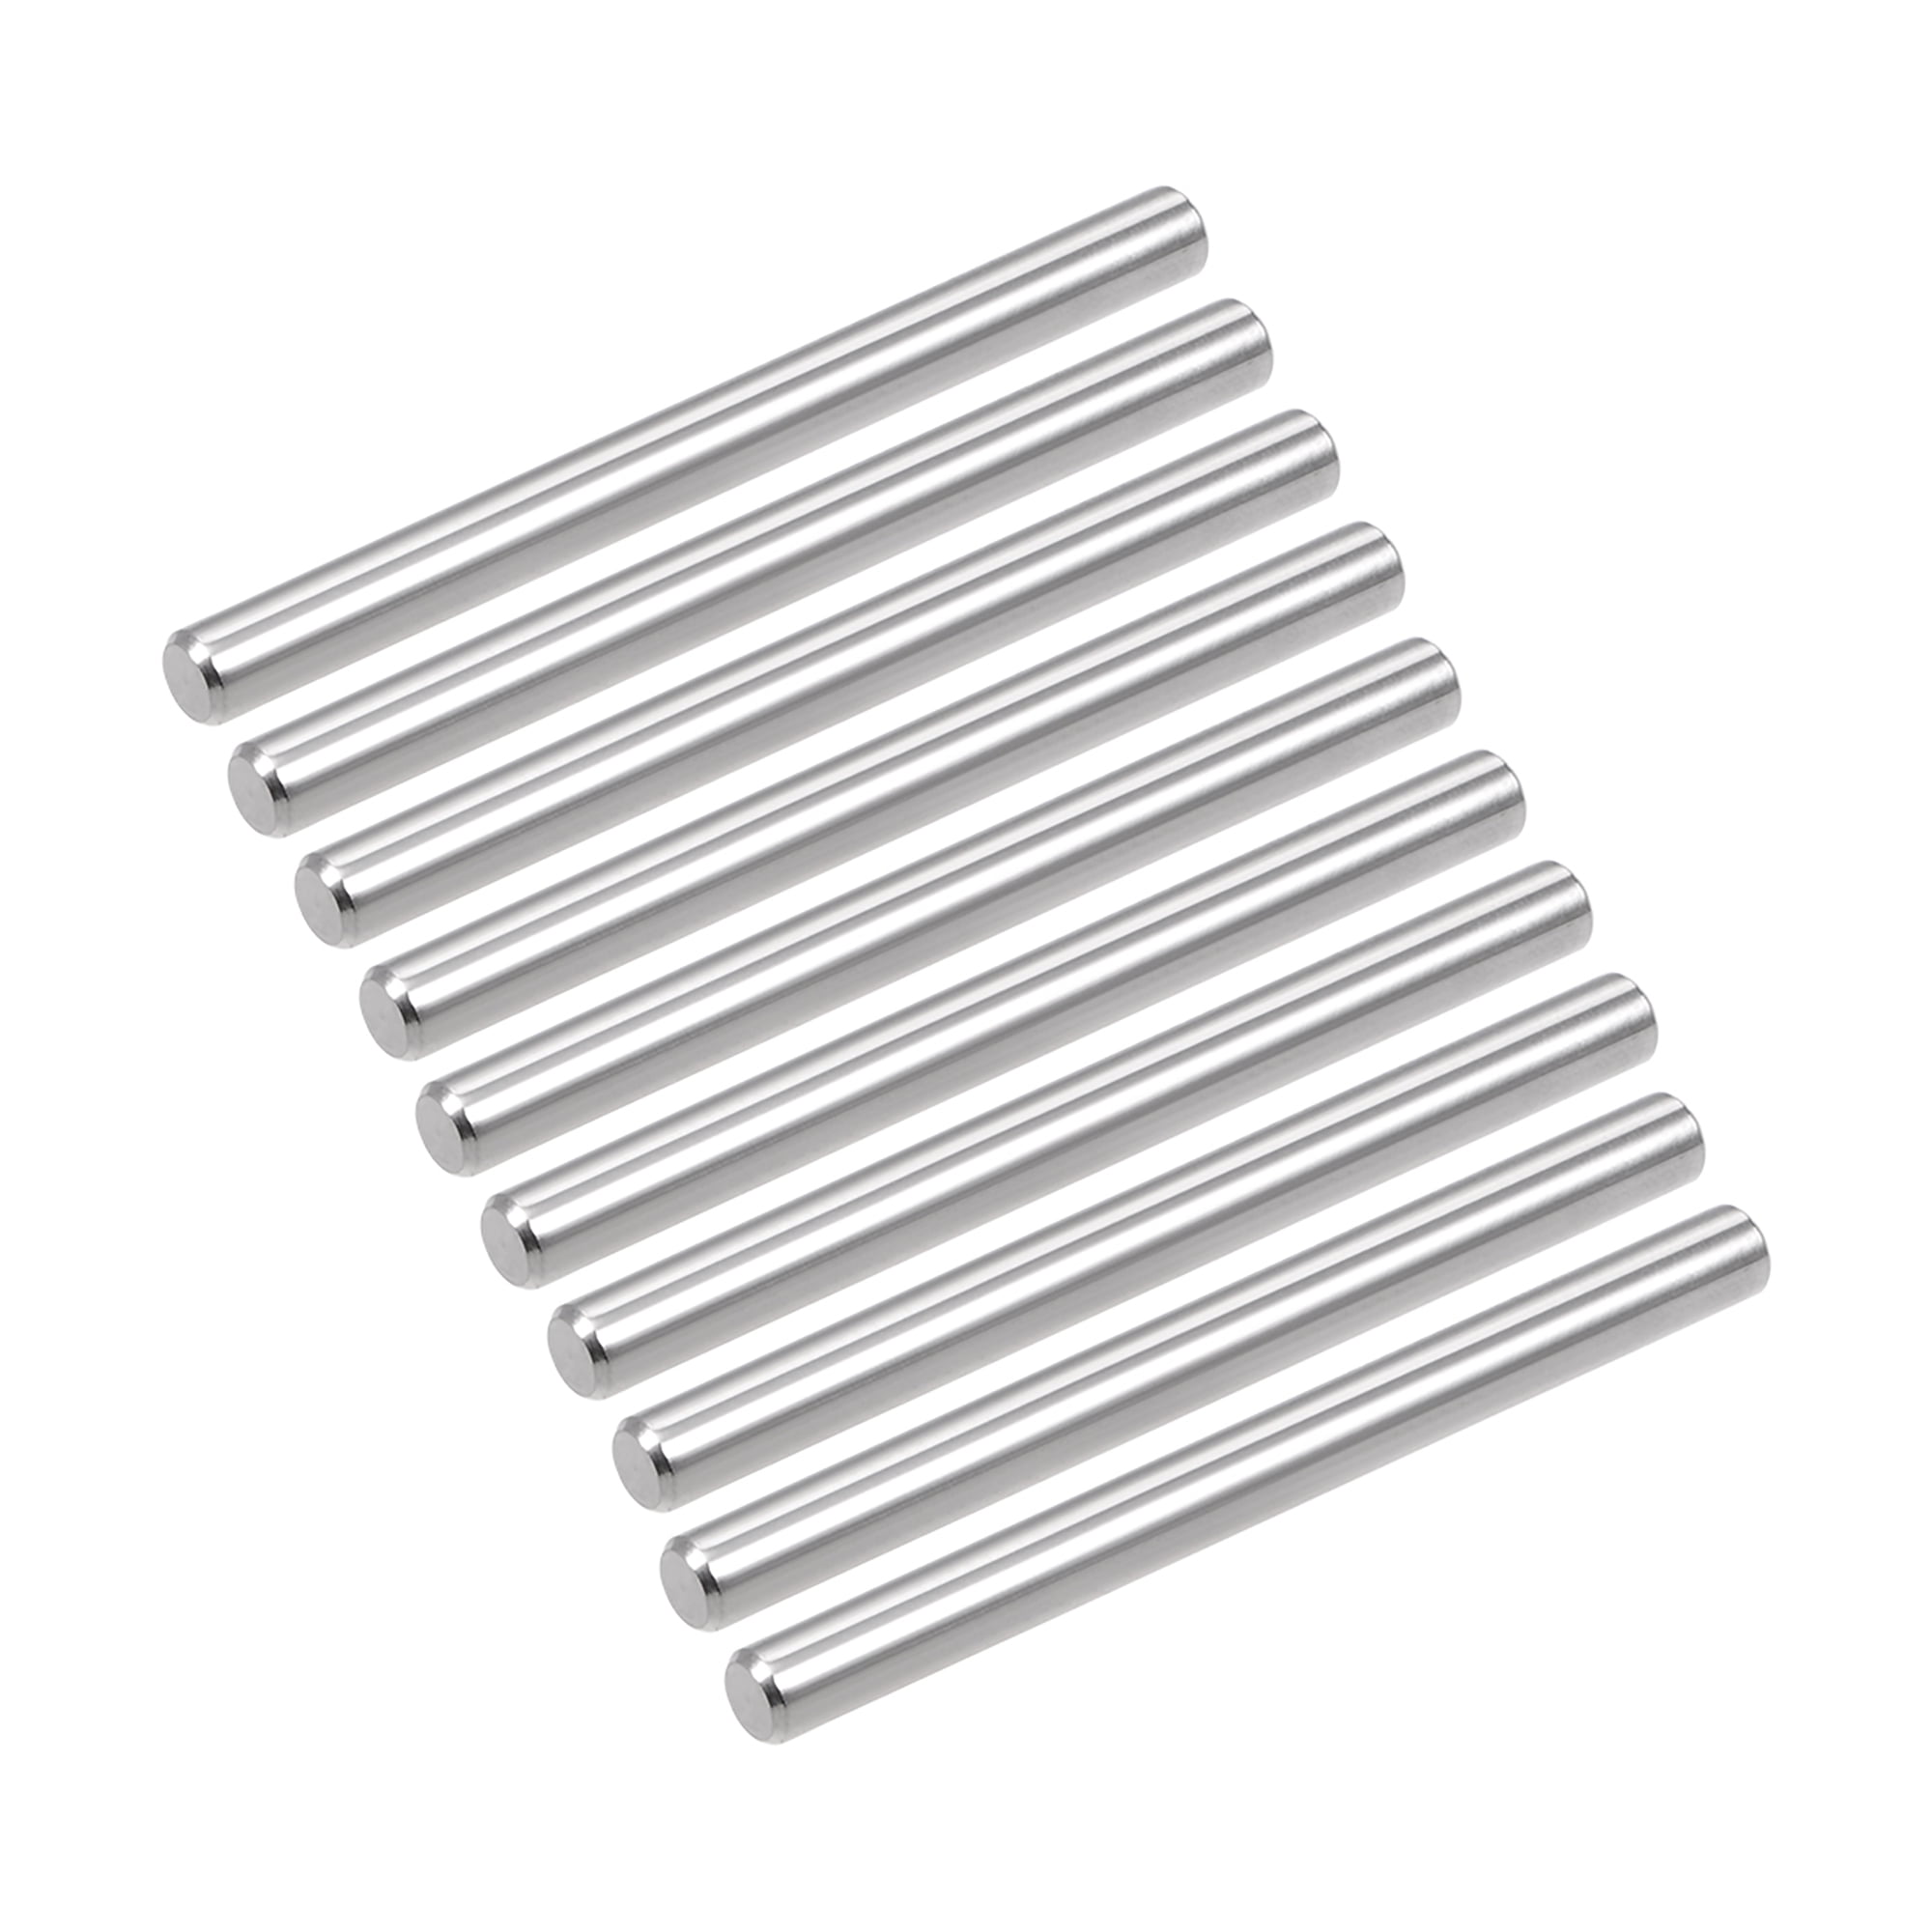 M5 M6 M8 Cylindrical Dowel pins Solid Parallel Position pins stainless steel 304 